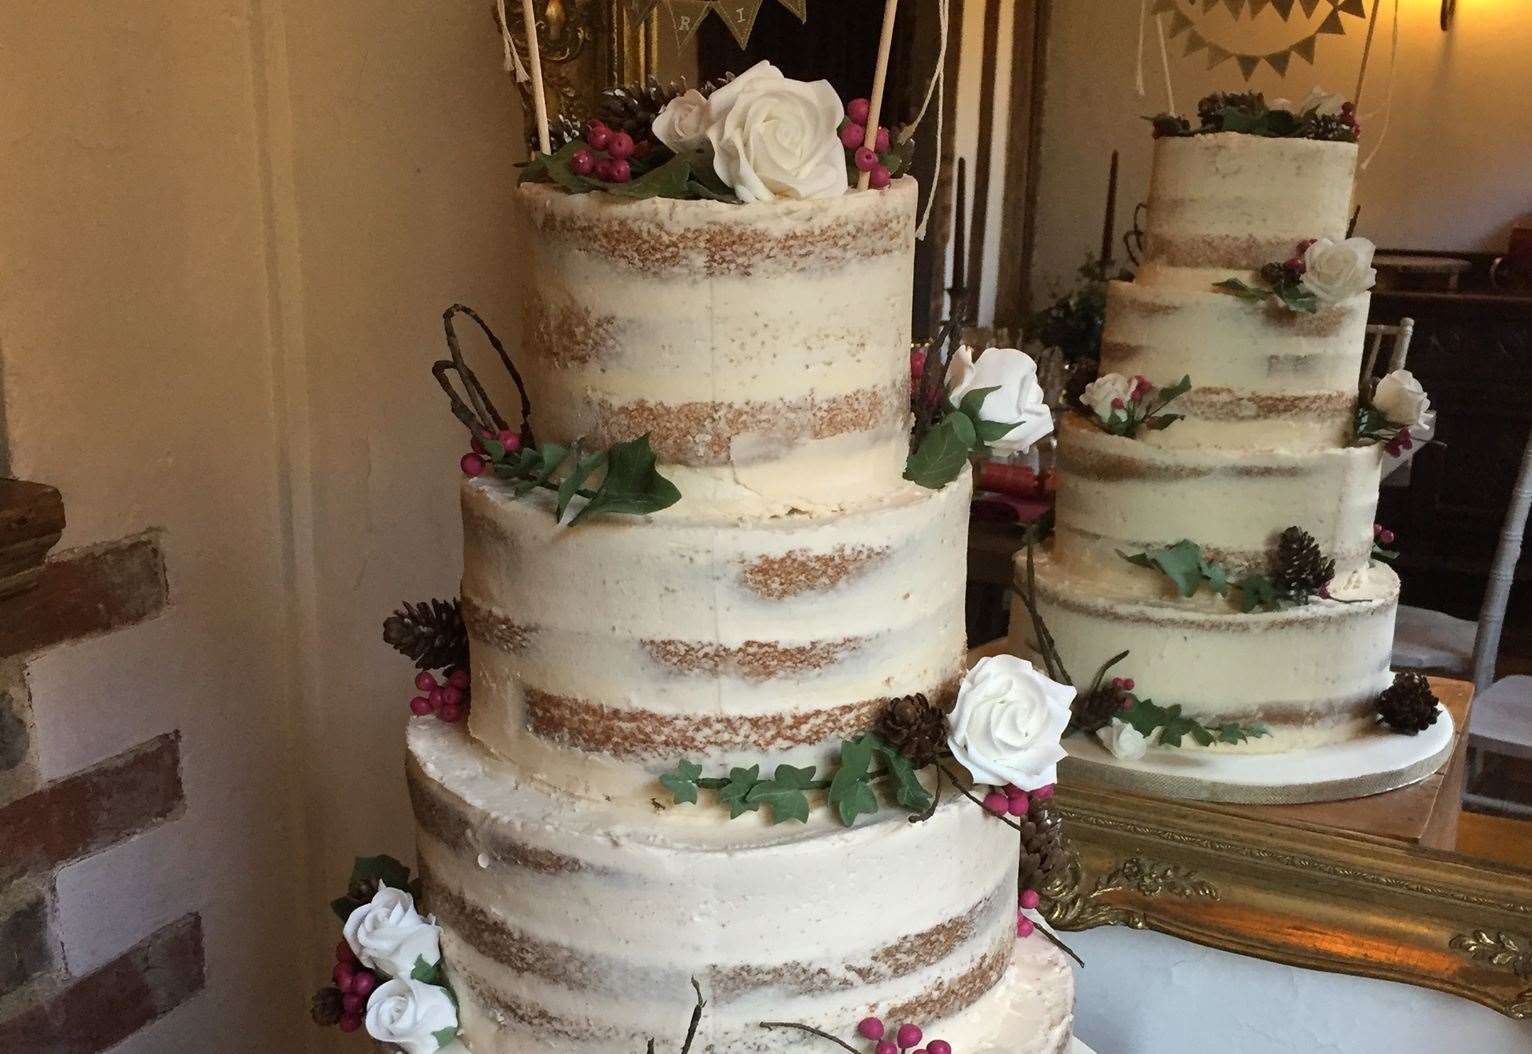 There are the conventional wedding cakes but also ones with an element of fun.